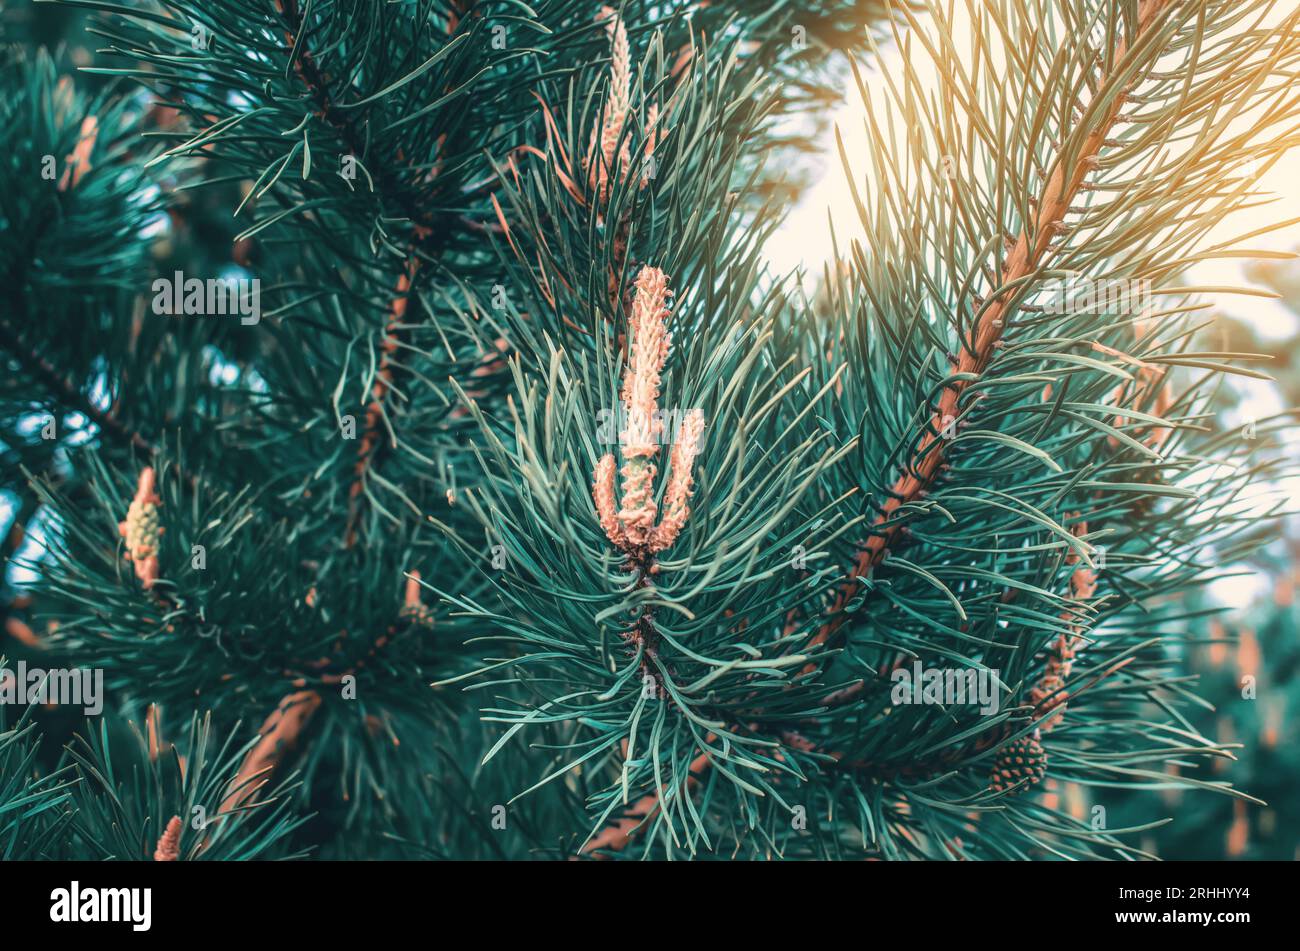 Pine buds on pine branches in forest Stock Photo